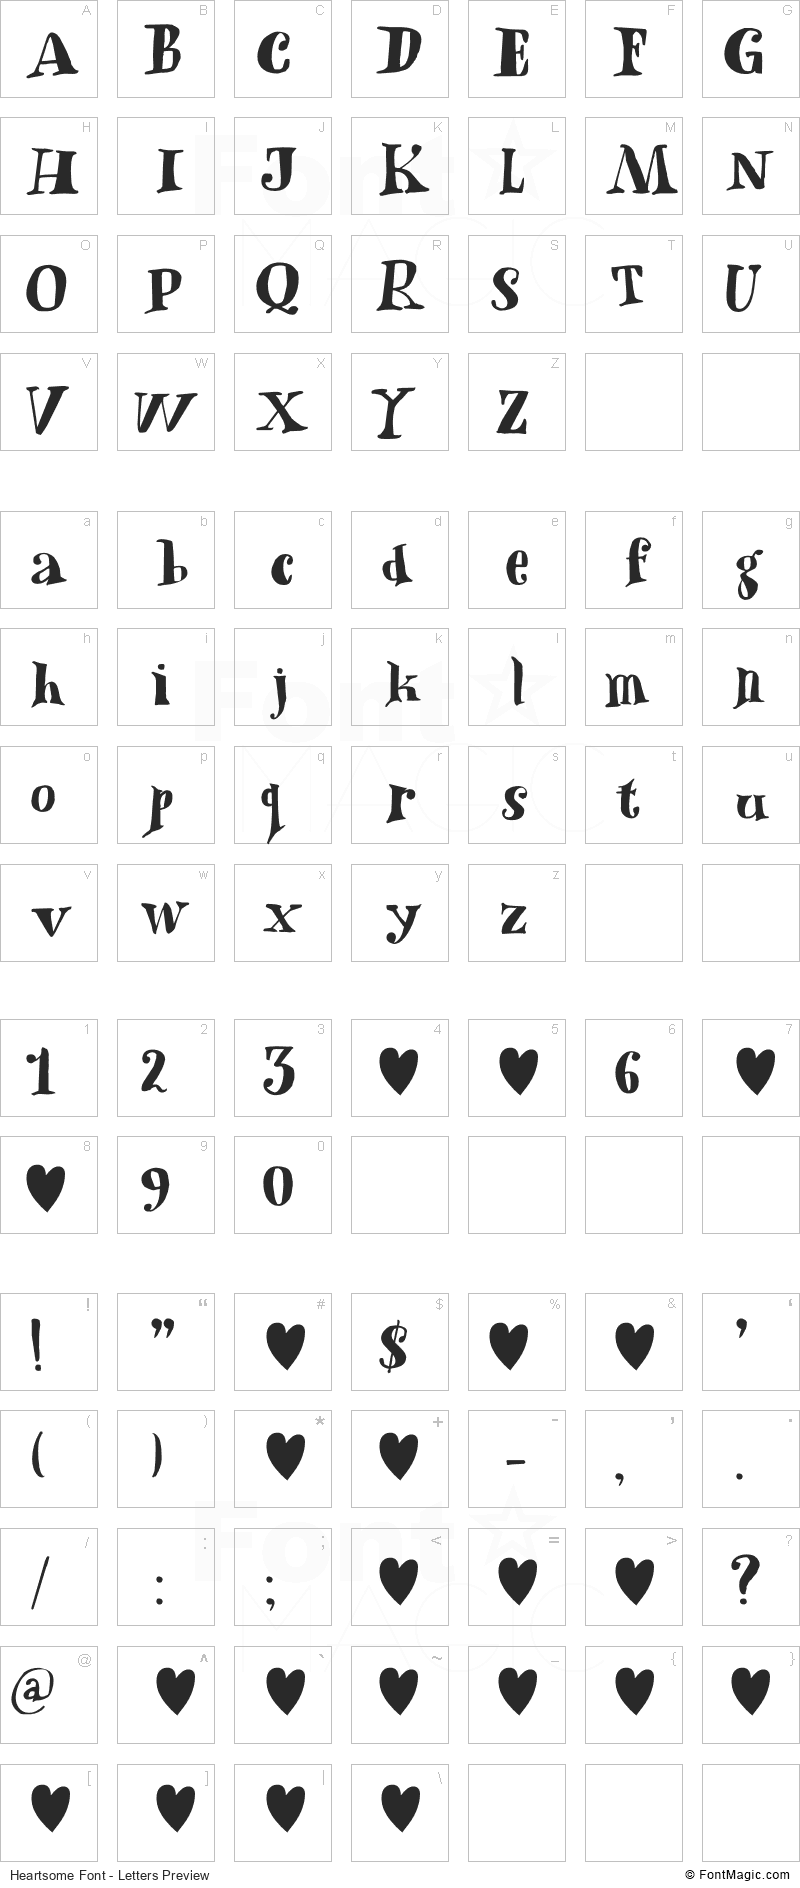 Heartsome Font - All Latters Preview Chart